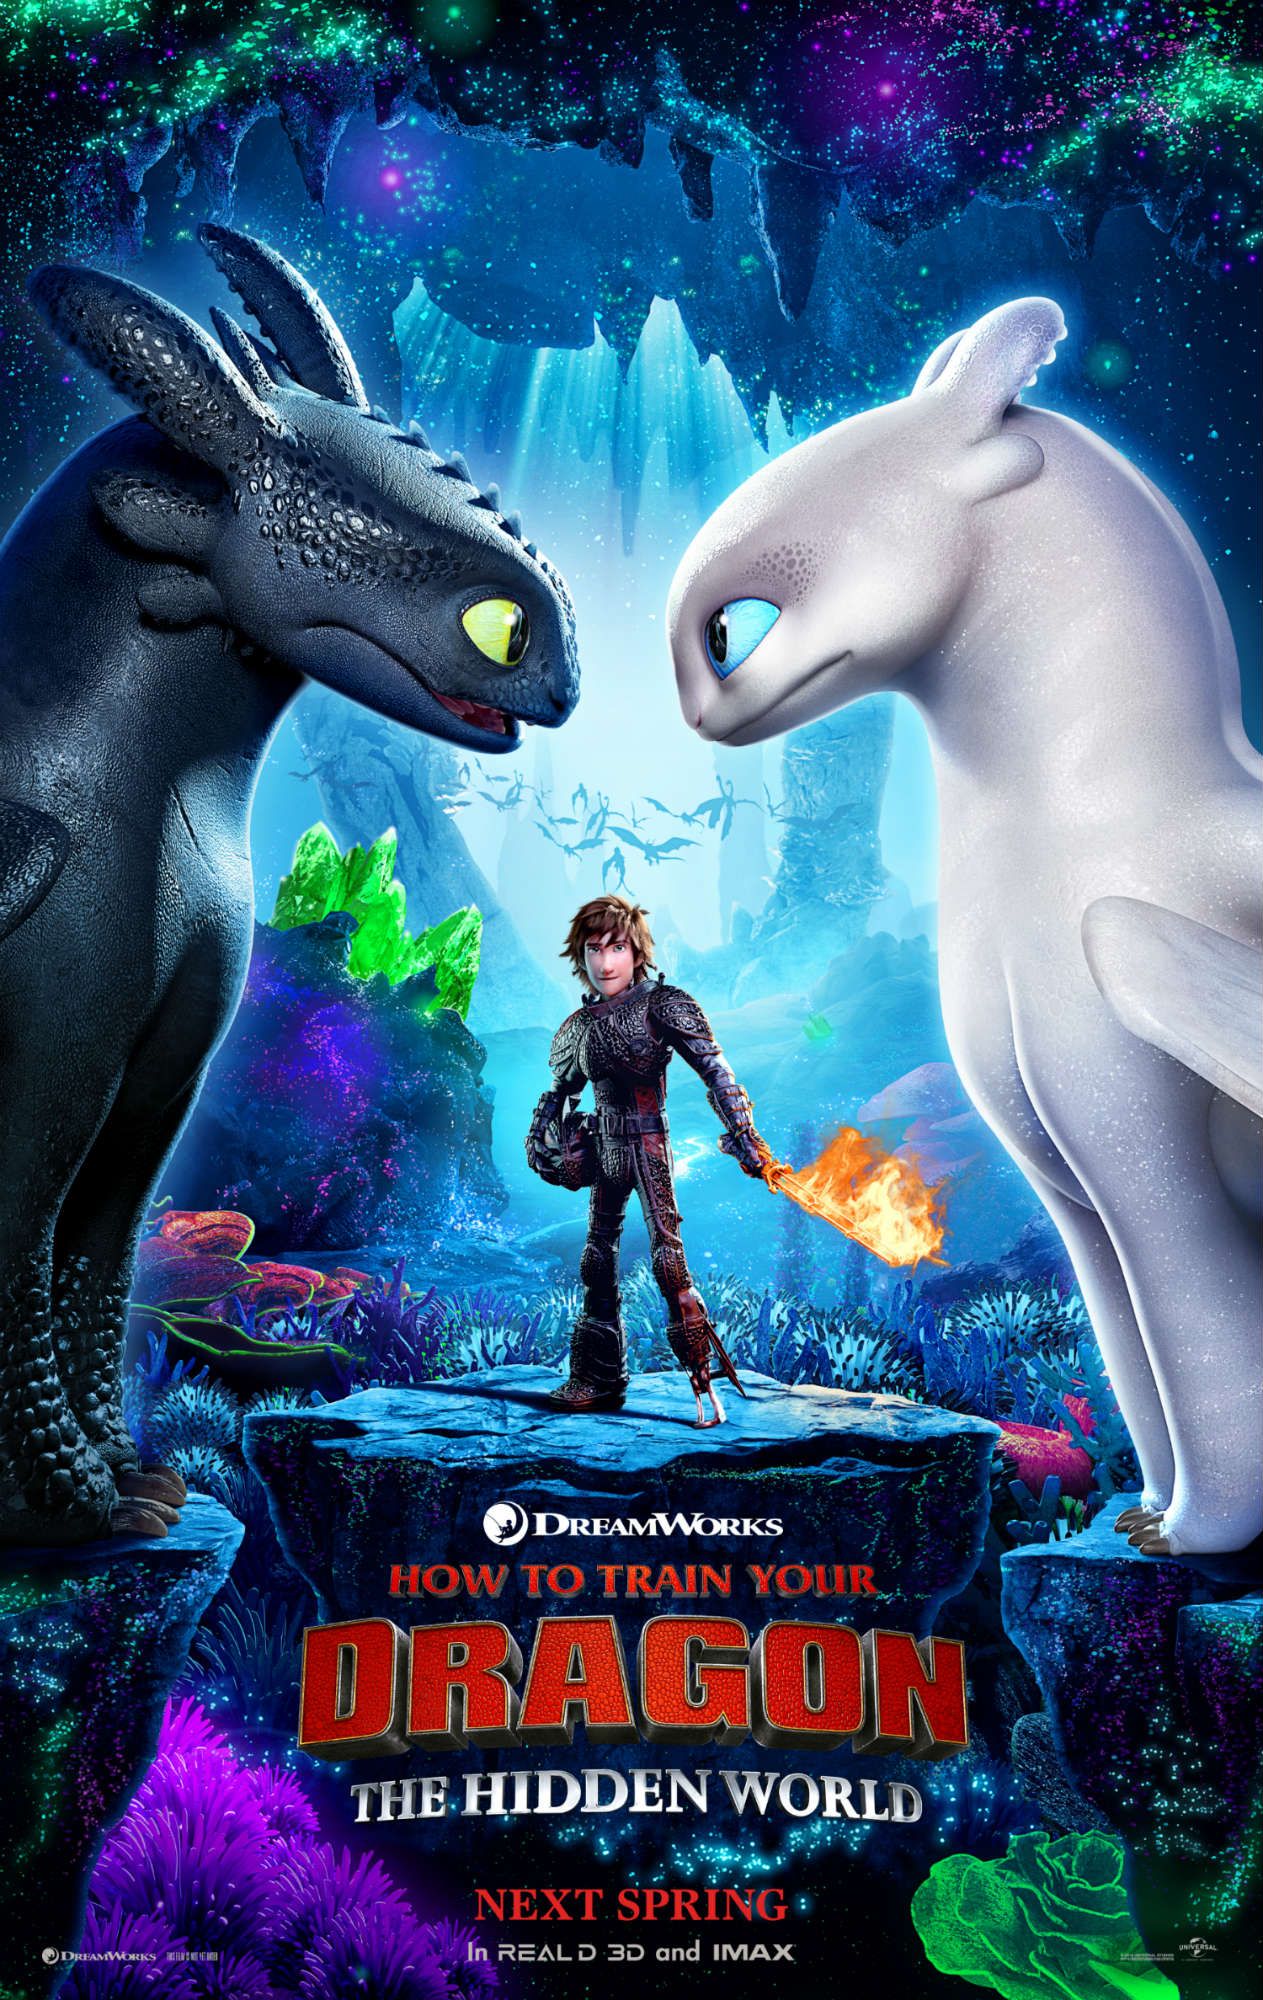 How to Train Your Dragon 3 Poster Teases A Brand New World